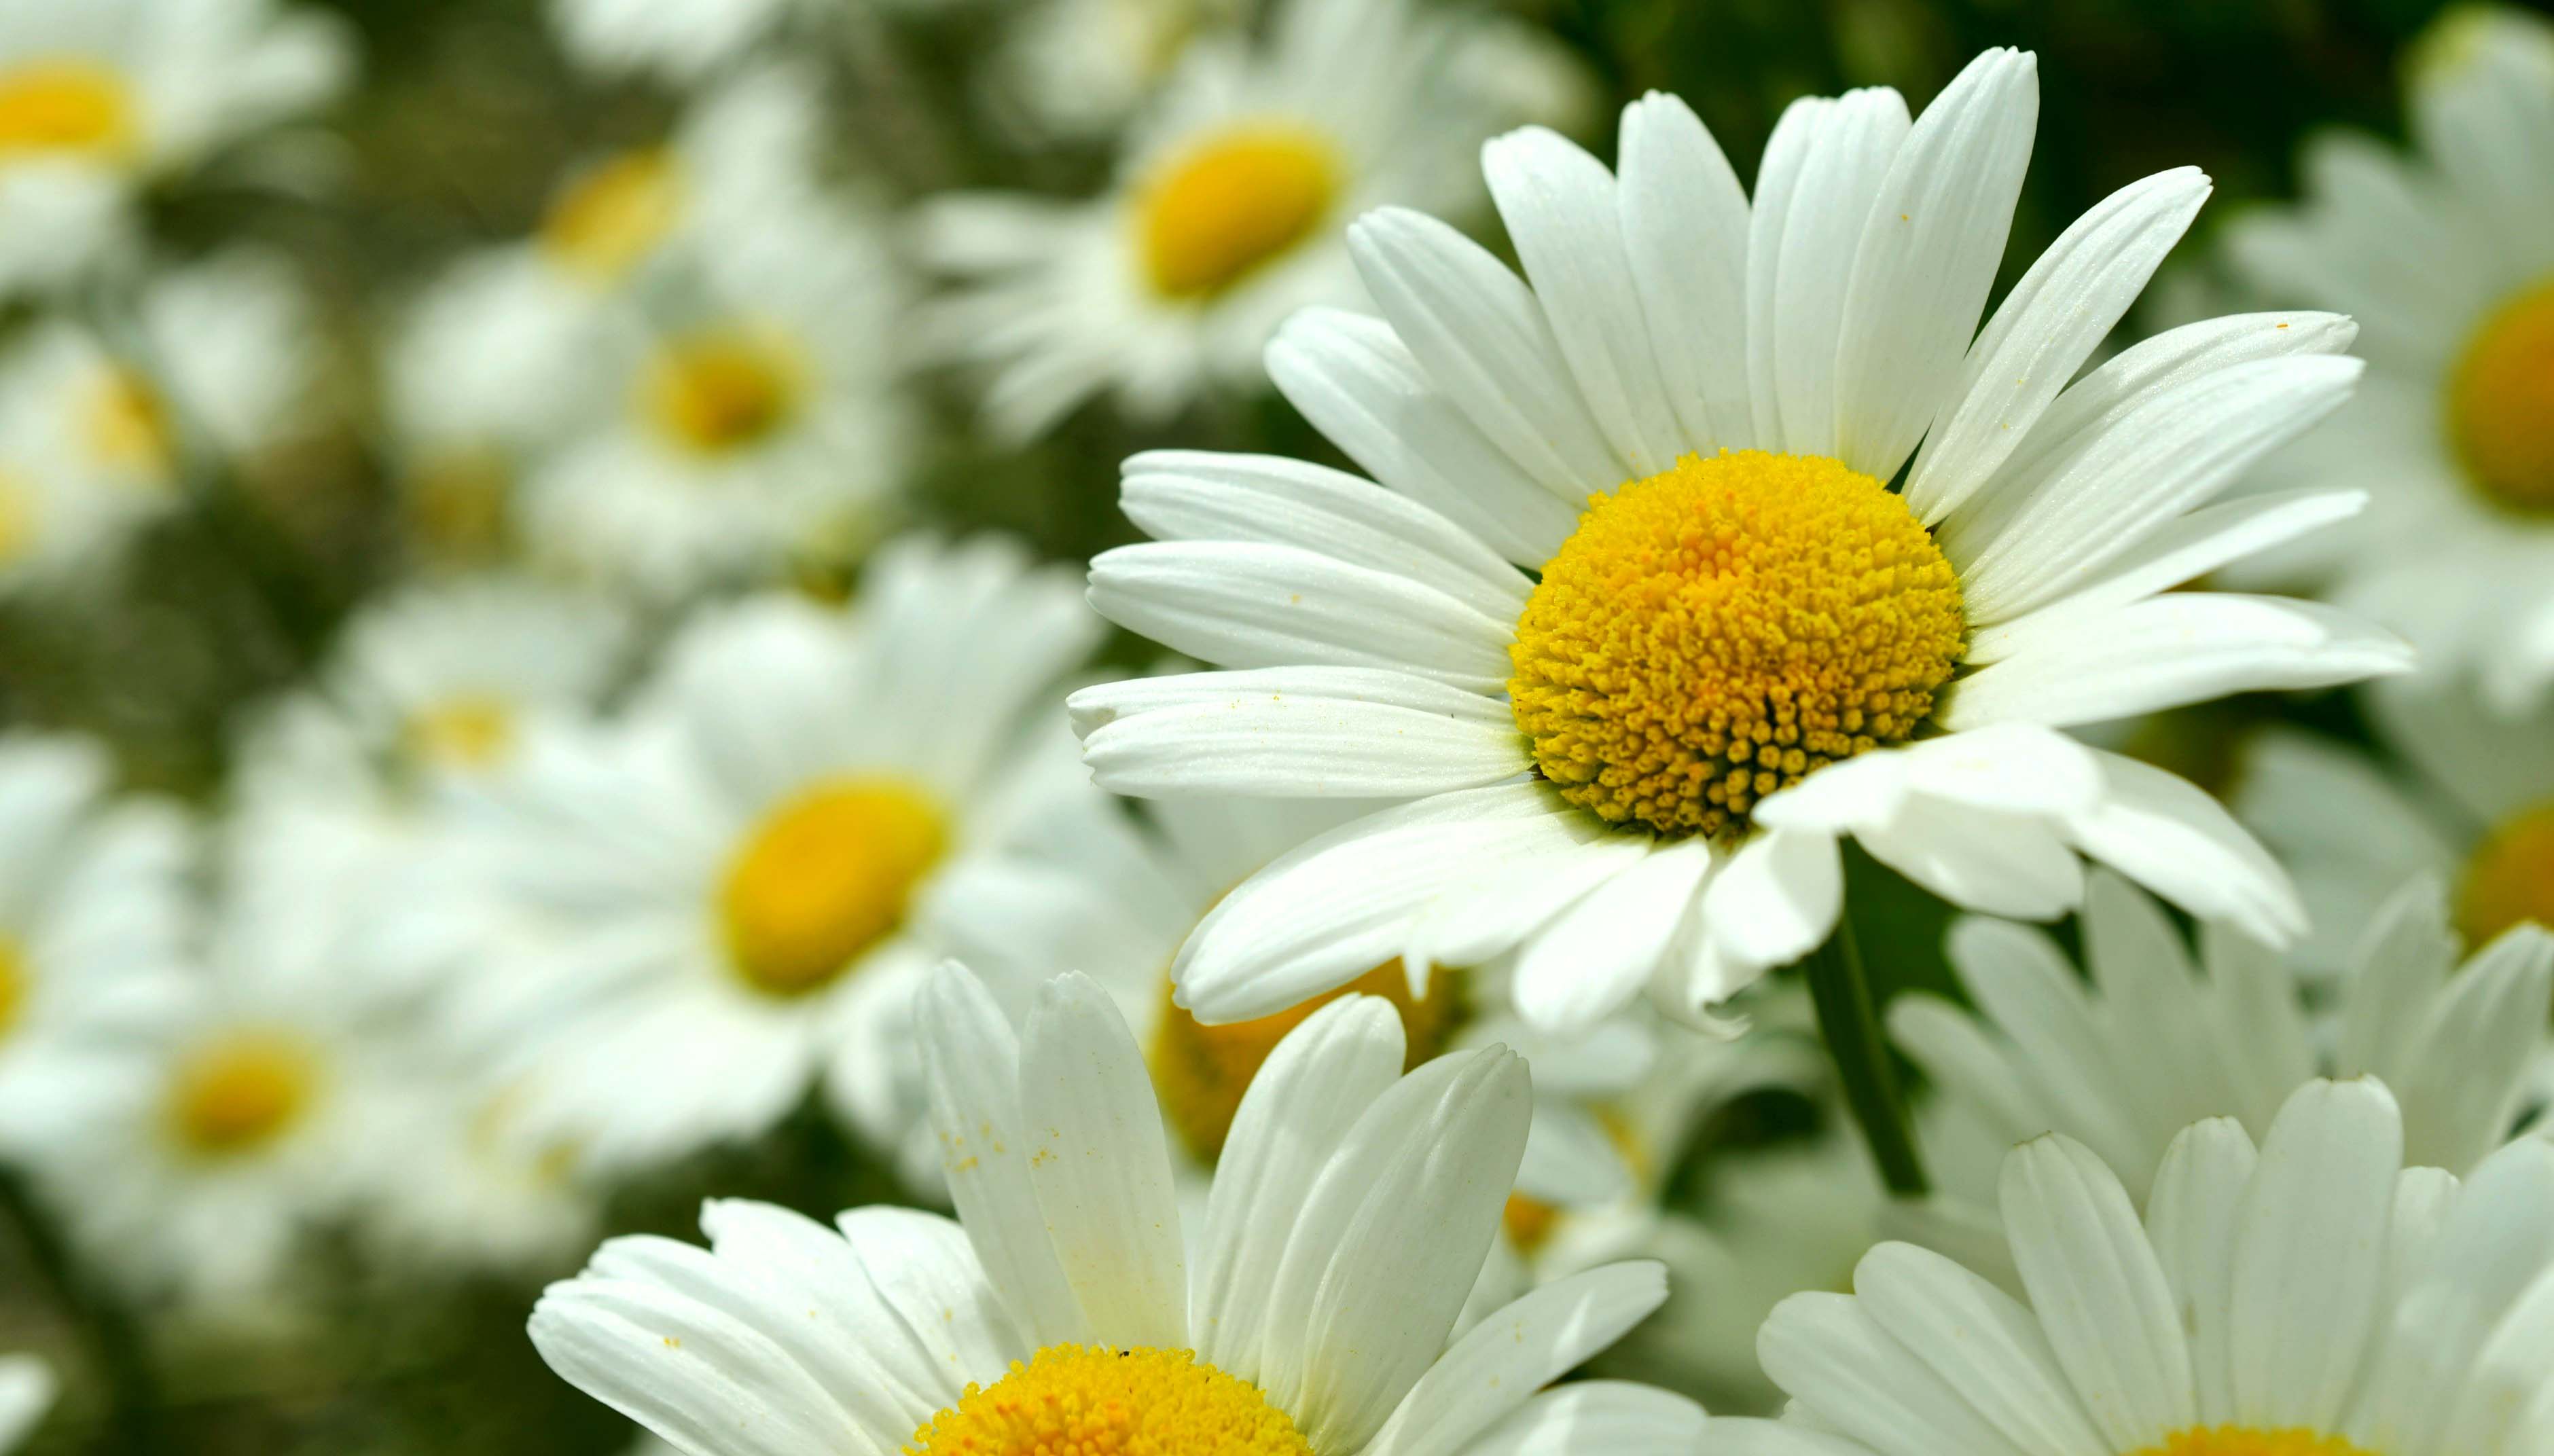 Daisy Flowers Image The Sign Of Purity And Innocence